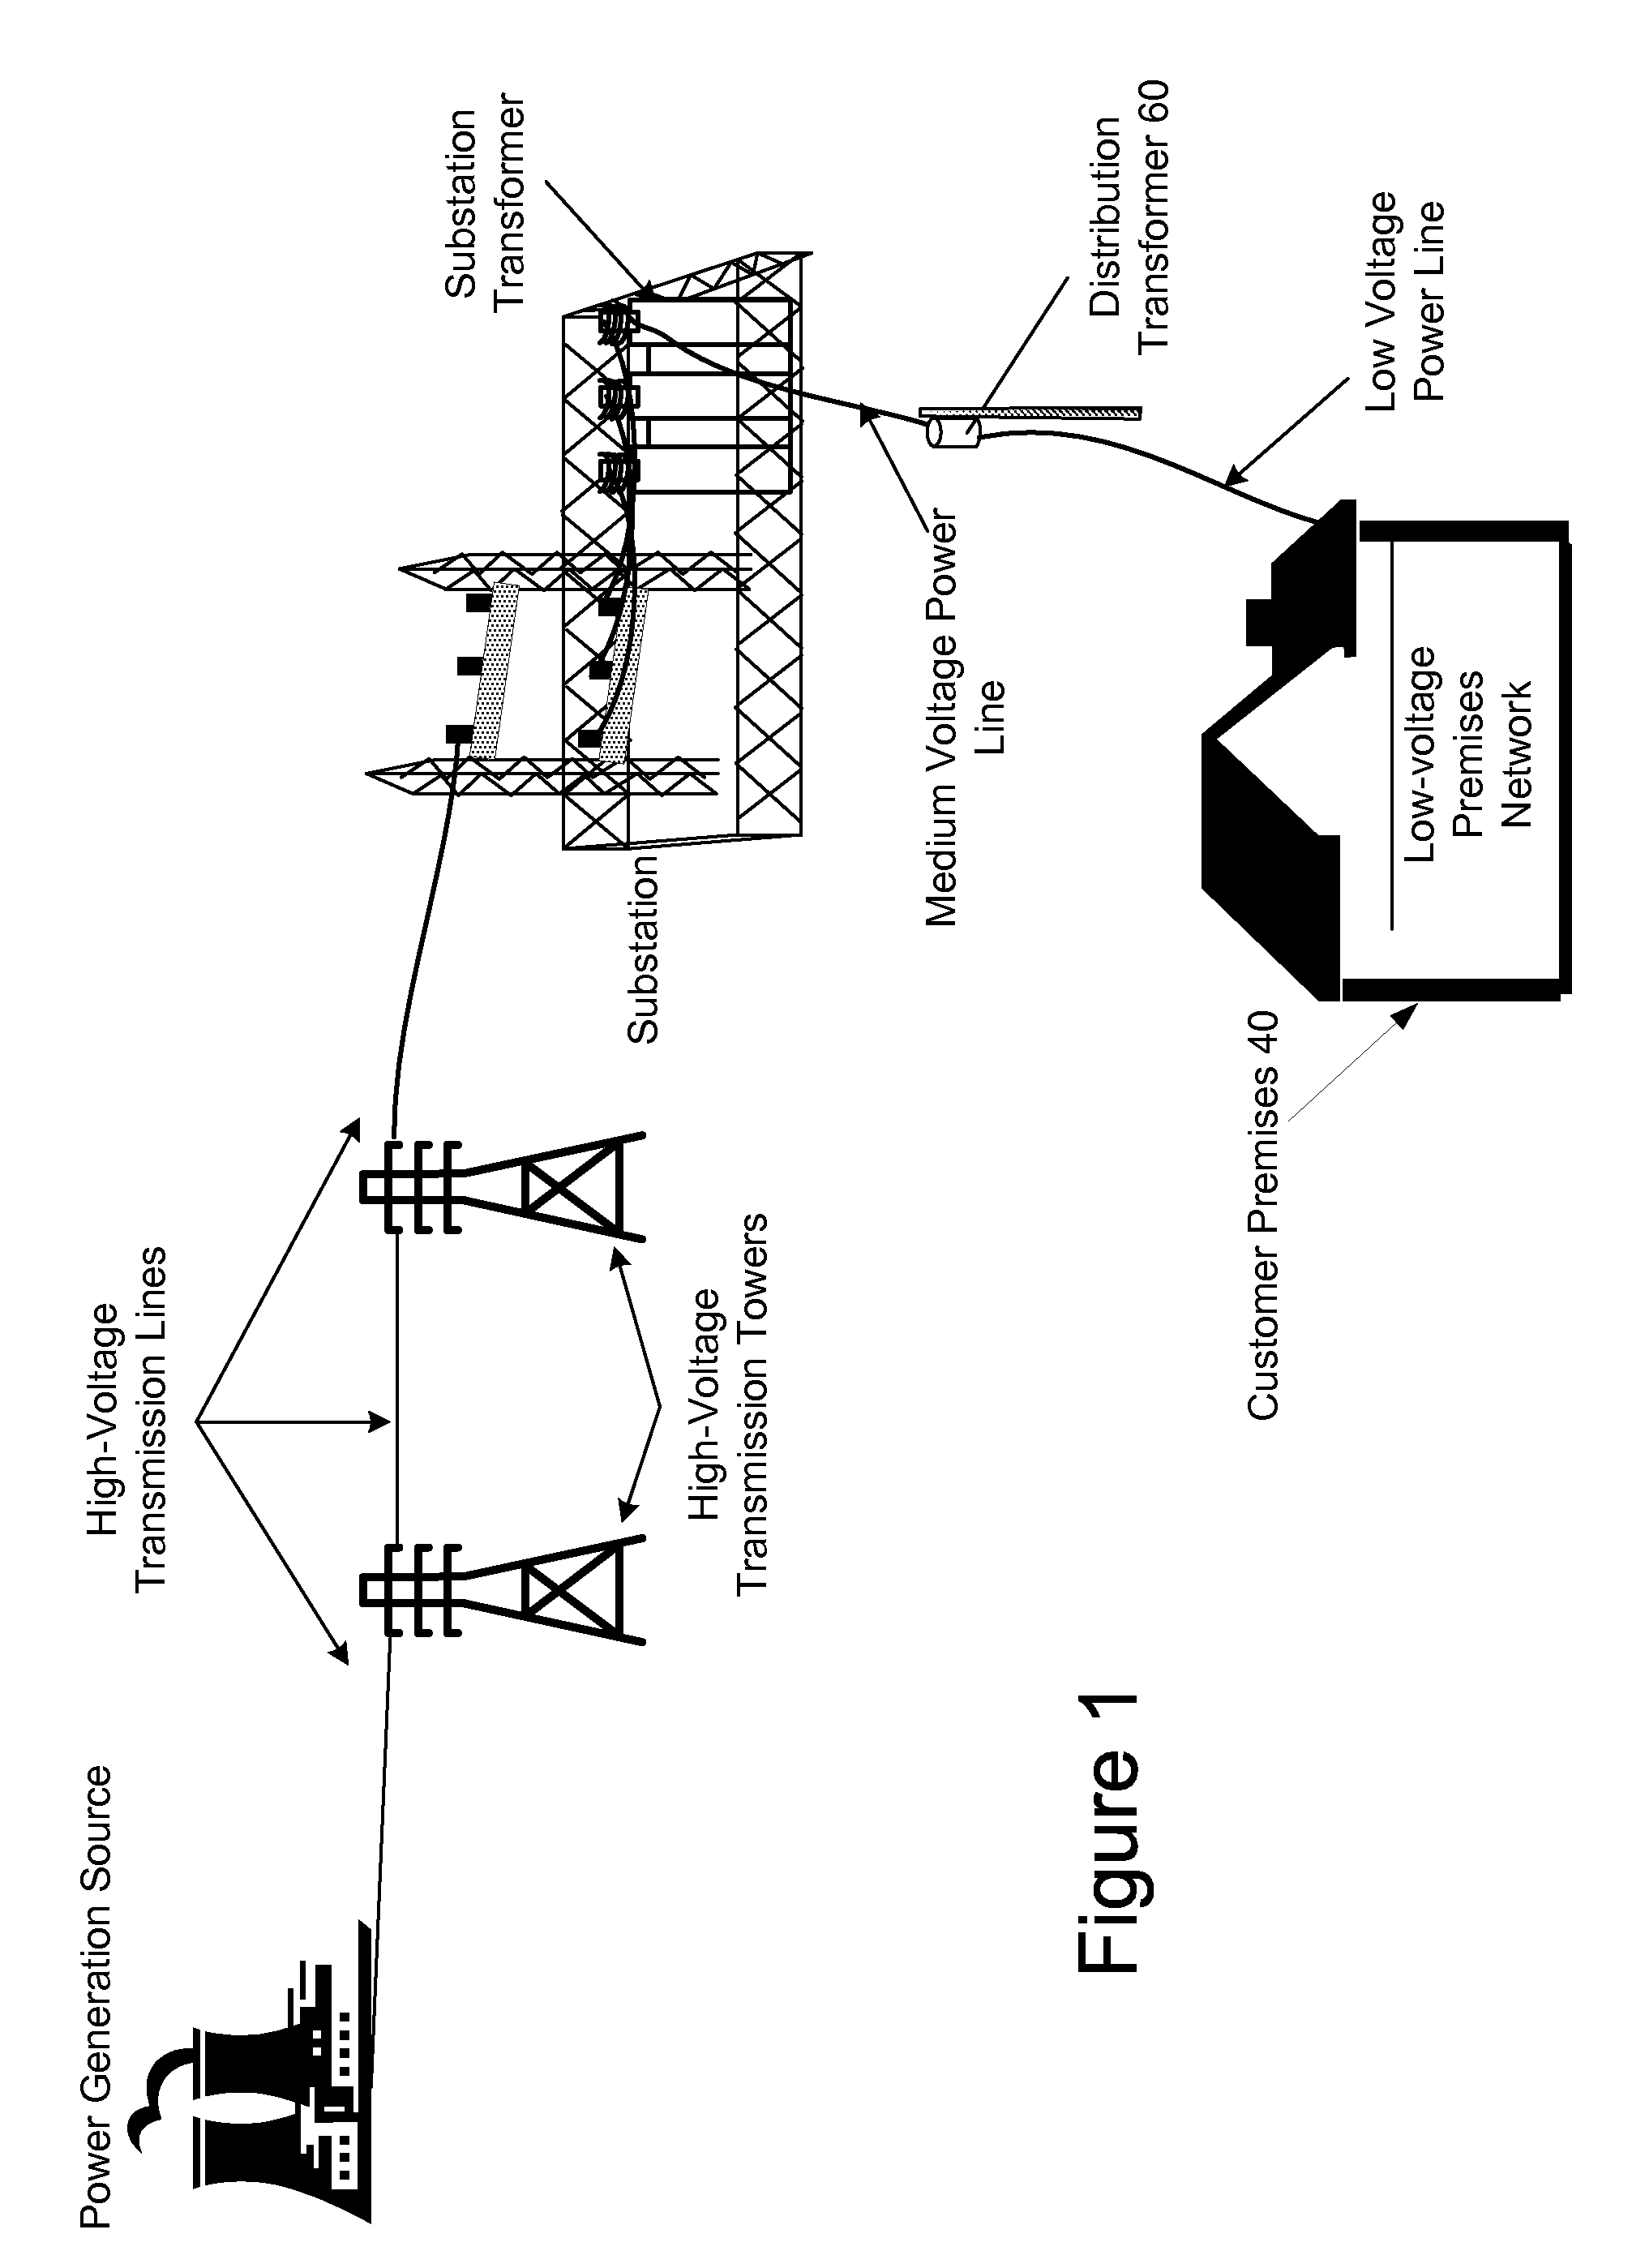 Power Line Communication System and Method